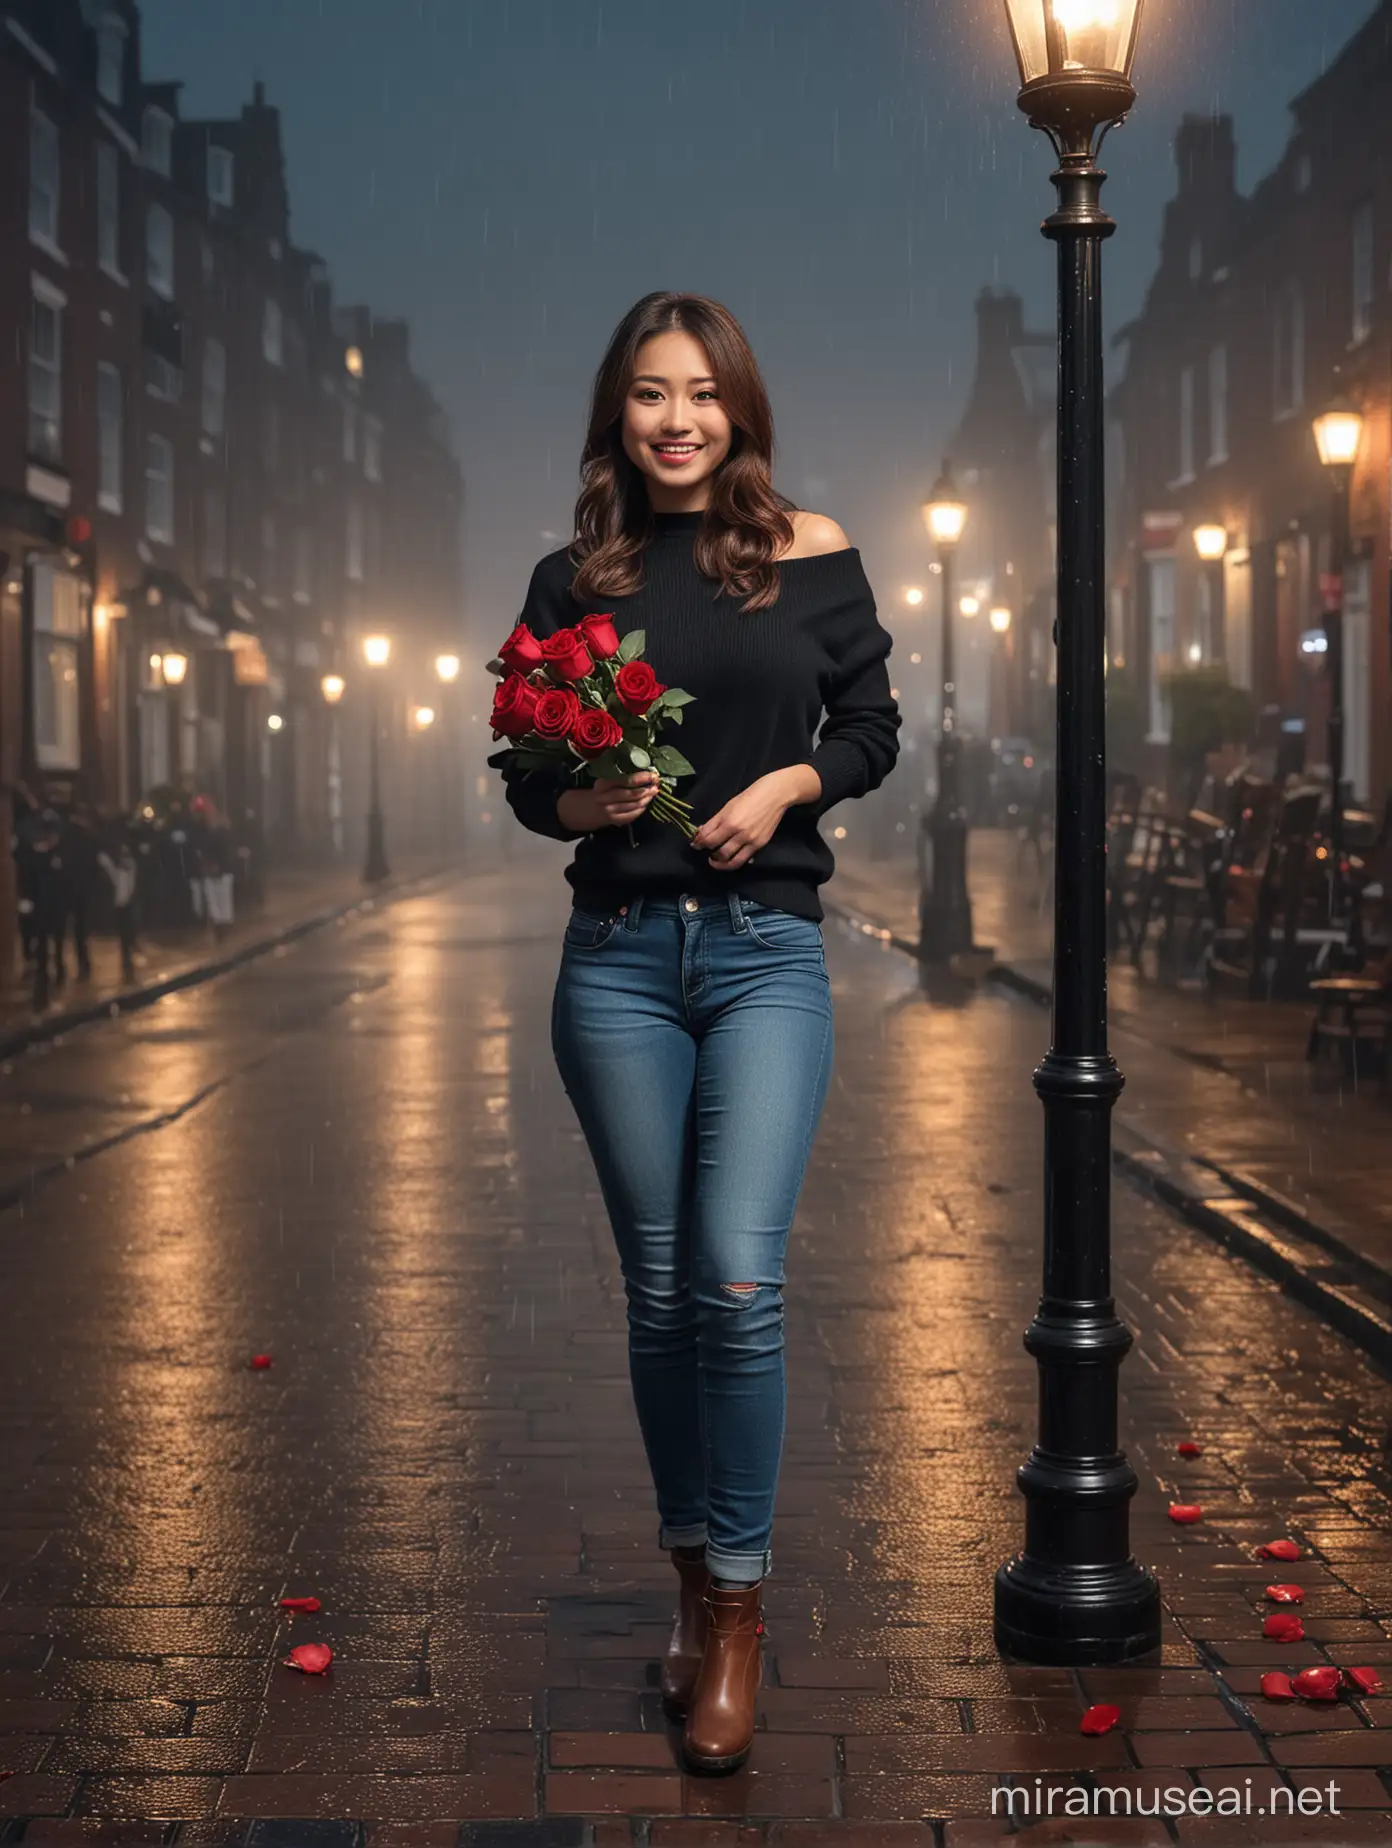 Asian Woman Holding Red Rose in Dynamic Pose in Rainy England City at Night